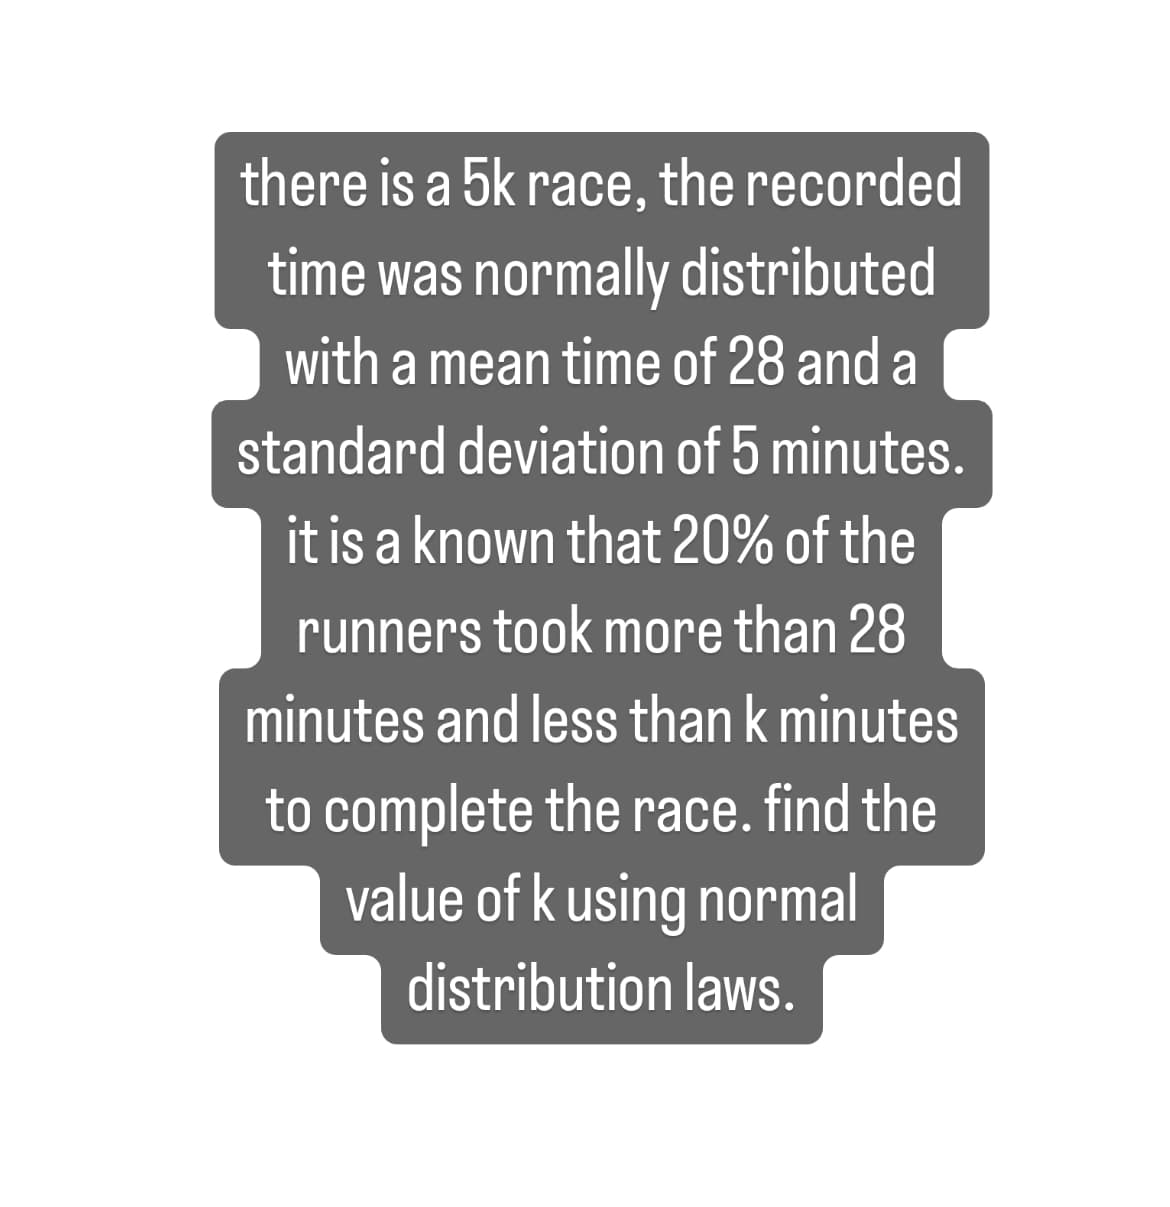 ### Understanding Normal Distribution in 5K Race Times

In a study of a 5K race, the time taken to complete the race was found to be normally distributed. The key statistical measures are:

- **Mean Time:** 28 minutes
- **Standard Deviation:** 5 minutes

From the data, it is known that:

- 20% of the runners took more than 28 minutes but less than \( k \) minutes to complete the race.

### Problem Statement

We need to determine the value of \( k \) using the principles of normal distribution.

### Solution Approach

1. **Identify the Mean and Standard Deviation:**
   - Mean (\( \mu \)) = 28 minutes
   - Standard Deviation (\( \sigma \)) = 5 minutes

2. **Understand the Normal Distribution:**
   - The normal distribution is symmetric about the mean.
   - The area under the curve represents the probability.

3. **Calculate the Z-Score:**
   - The Z-score represents the number of standard deviations a data point is from the mean.
   - \( Z = \frac{X - \mu}{\sigma} \)

4. **Use the Given Probabilities:**
   - 20% of the runners took more than 28 minutes but less than \( k \) minutes. This implies that the area under the normal curve from a Z-score of 0 to the Z-score corresponding to \( k \) is 0.20.

5. **Find the Corresponding Z-Score:**
   - Using a Z-table or normal distribution calculator, find the Z-score for which 20% of the distribution lies between 0 and Z. This Z-score corresponds to the upper 20% of the mean.
   - Let Z be the Z-score such that \( P(0 < Z < z) = 0.20 \).

6. **Calculate \( k \):**
   - \( k = \mu + Z \sigma \)
   - Substitute \( \mu \), \( \sigma \), and the Z value obtained from the table.

7. **Interpret the Value:**
   - \( k \) will be the time in minutes.

By applying these steps, you should be able to determine the value of \( k \) according to the normal distribution laws.